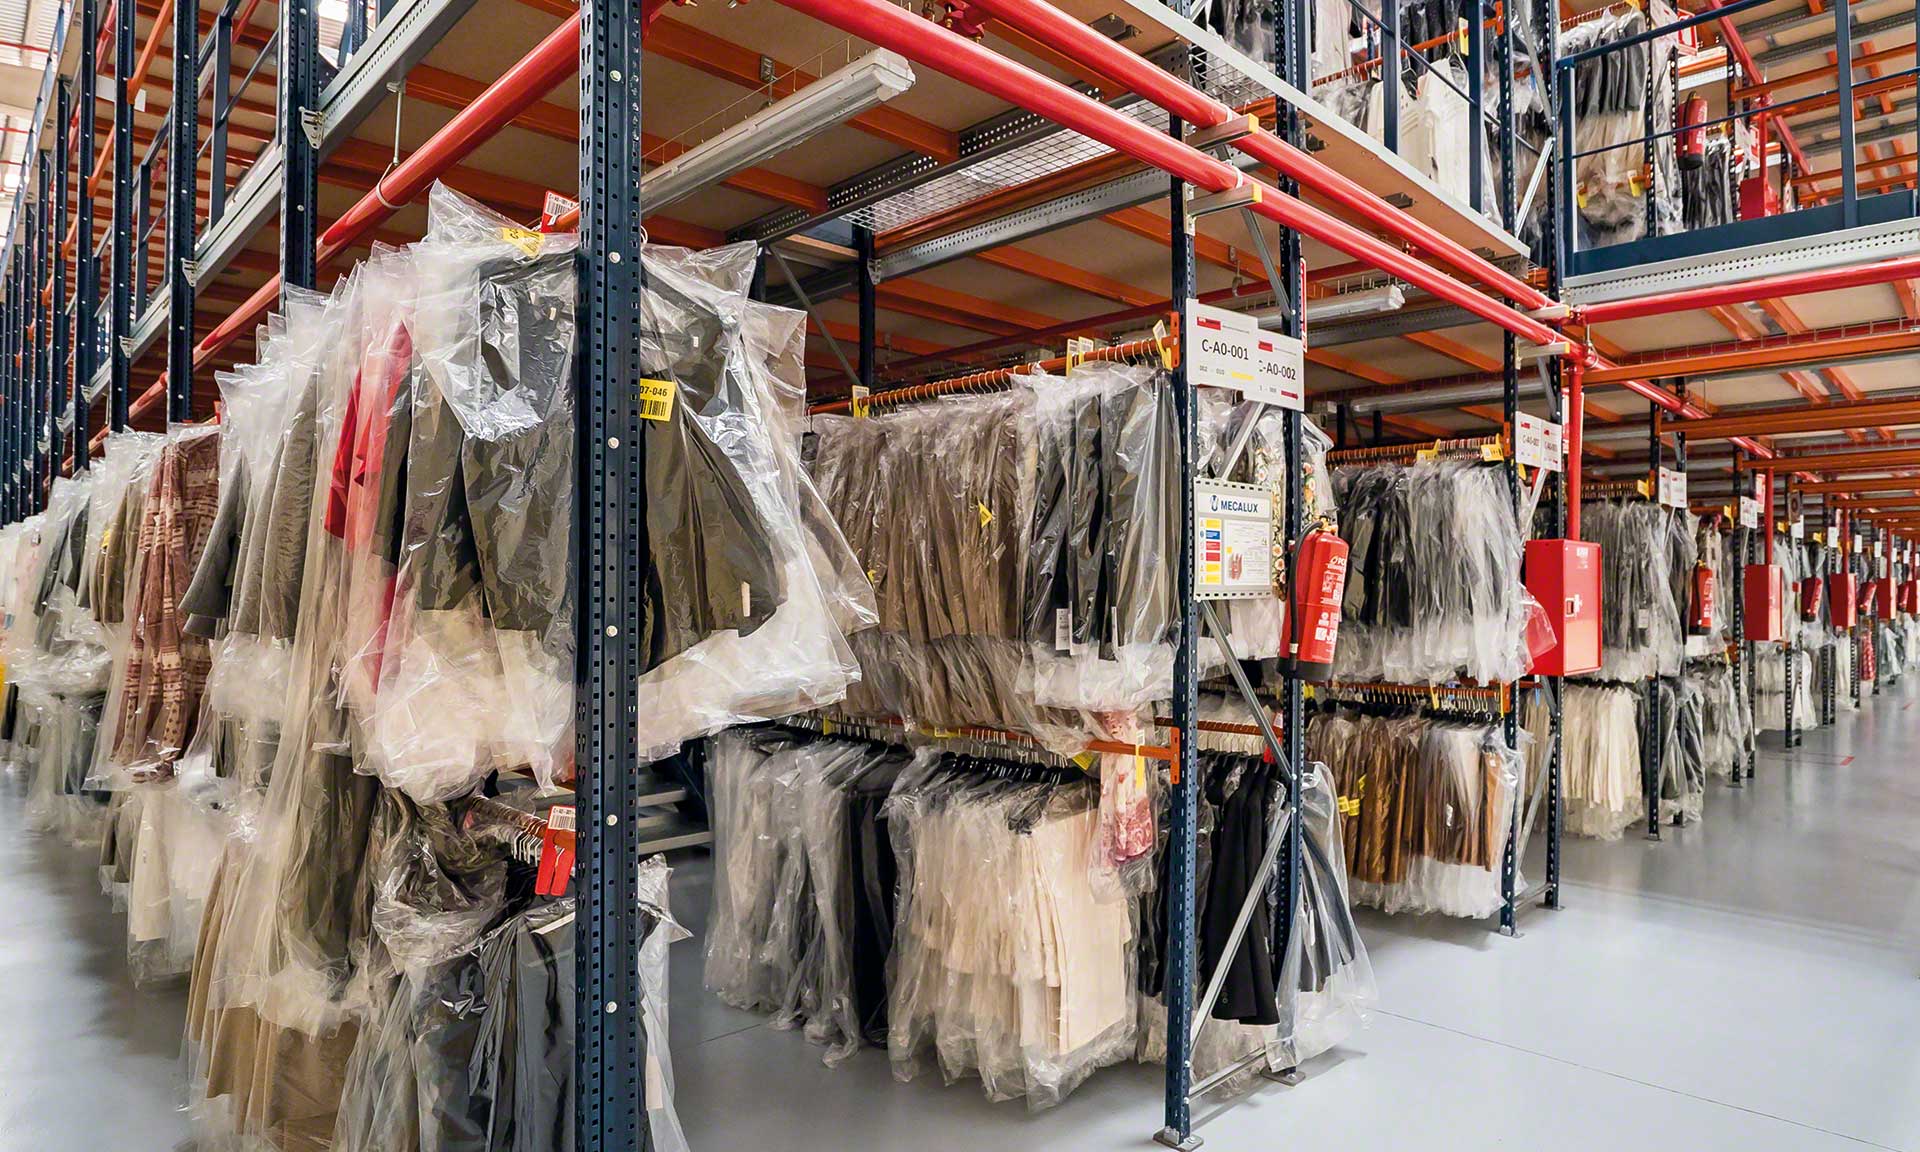 Warehouse clothing racking: how to store garments